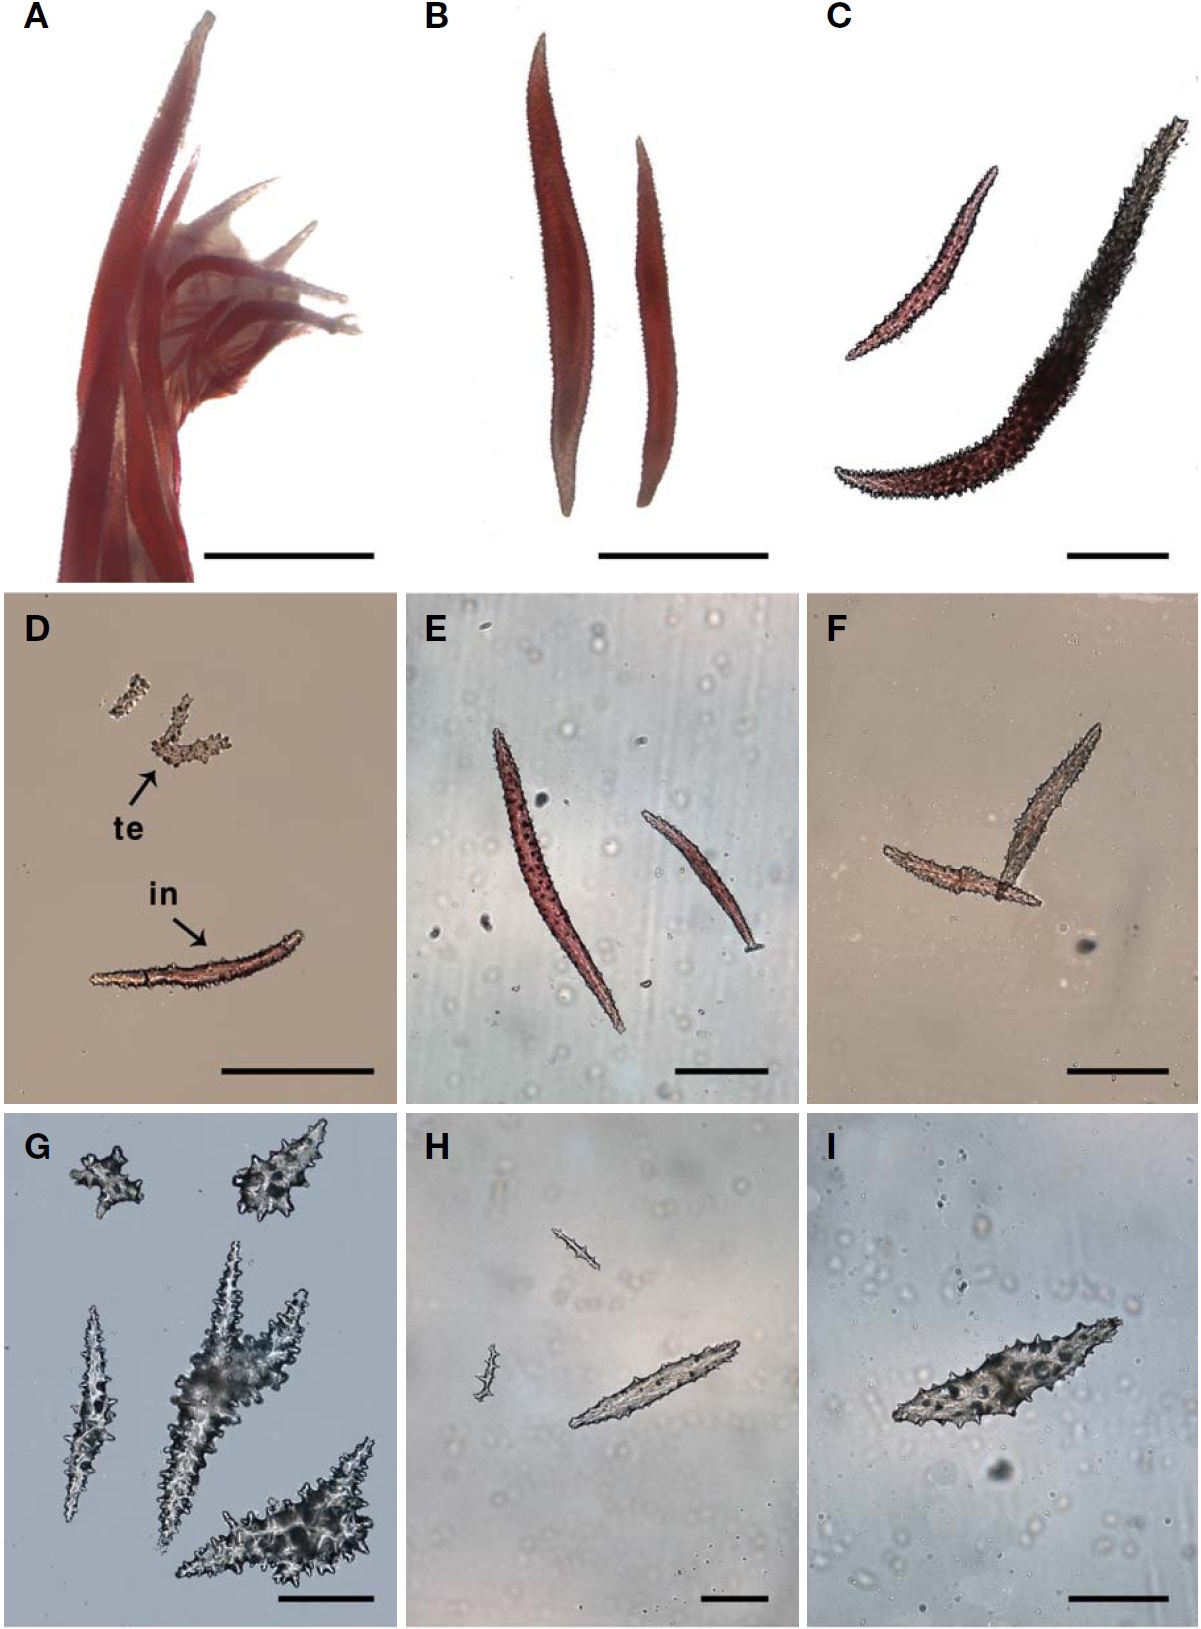 Sclerites of Dendronephthya (Dendronephthya) koellikeri. A, Polyp armature; B, Supporting bundle; C, Point; D, Tentacle (te) and intermediate (in); E, Polyp stalk; F, Branch cortex; G, Stalk cortex; H, Canal wall of branch; I, Canal wall of stalk. Scale bars: A, B=1 mm, C-I=0.2 mm.